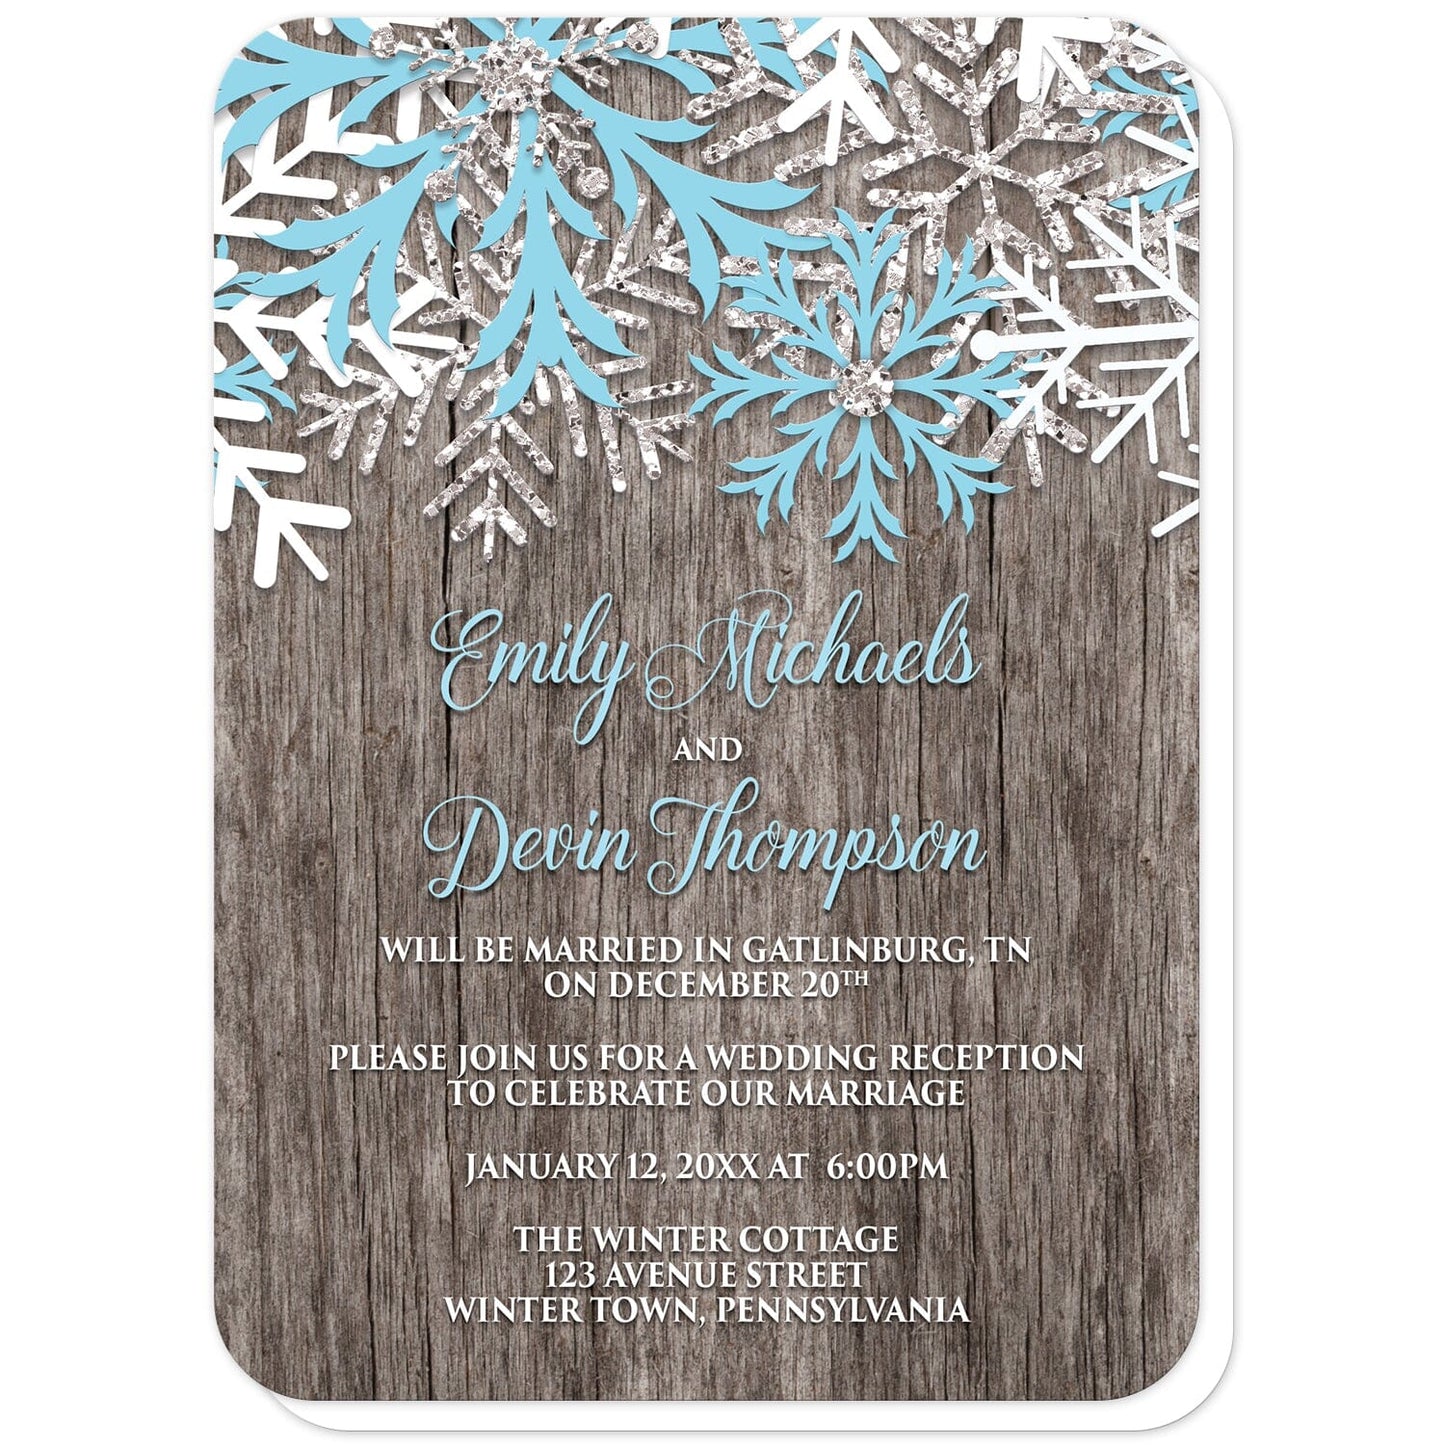 Rustic Winter Wood Blue Snowflake Reception Only Invitations (with rounded corners) at Artistically Invited. Country-inspired rustic winter wood blue snowflake reception only invitations designed with light blue, white, and silver-colored glitter-illustrated snowflakes along the top over a rustic wood pattern illustration. Your personalized post-wedding reception details are custom printed in light blue and white over the wood background below the snowflakes.